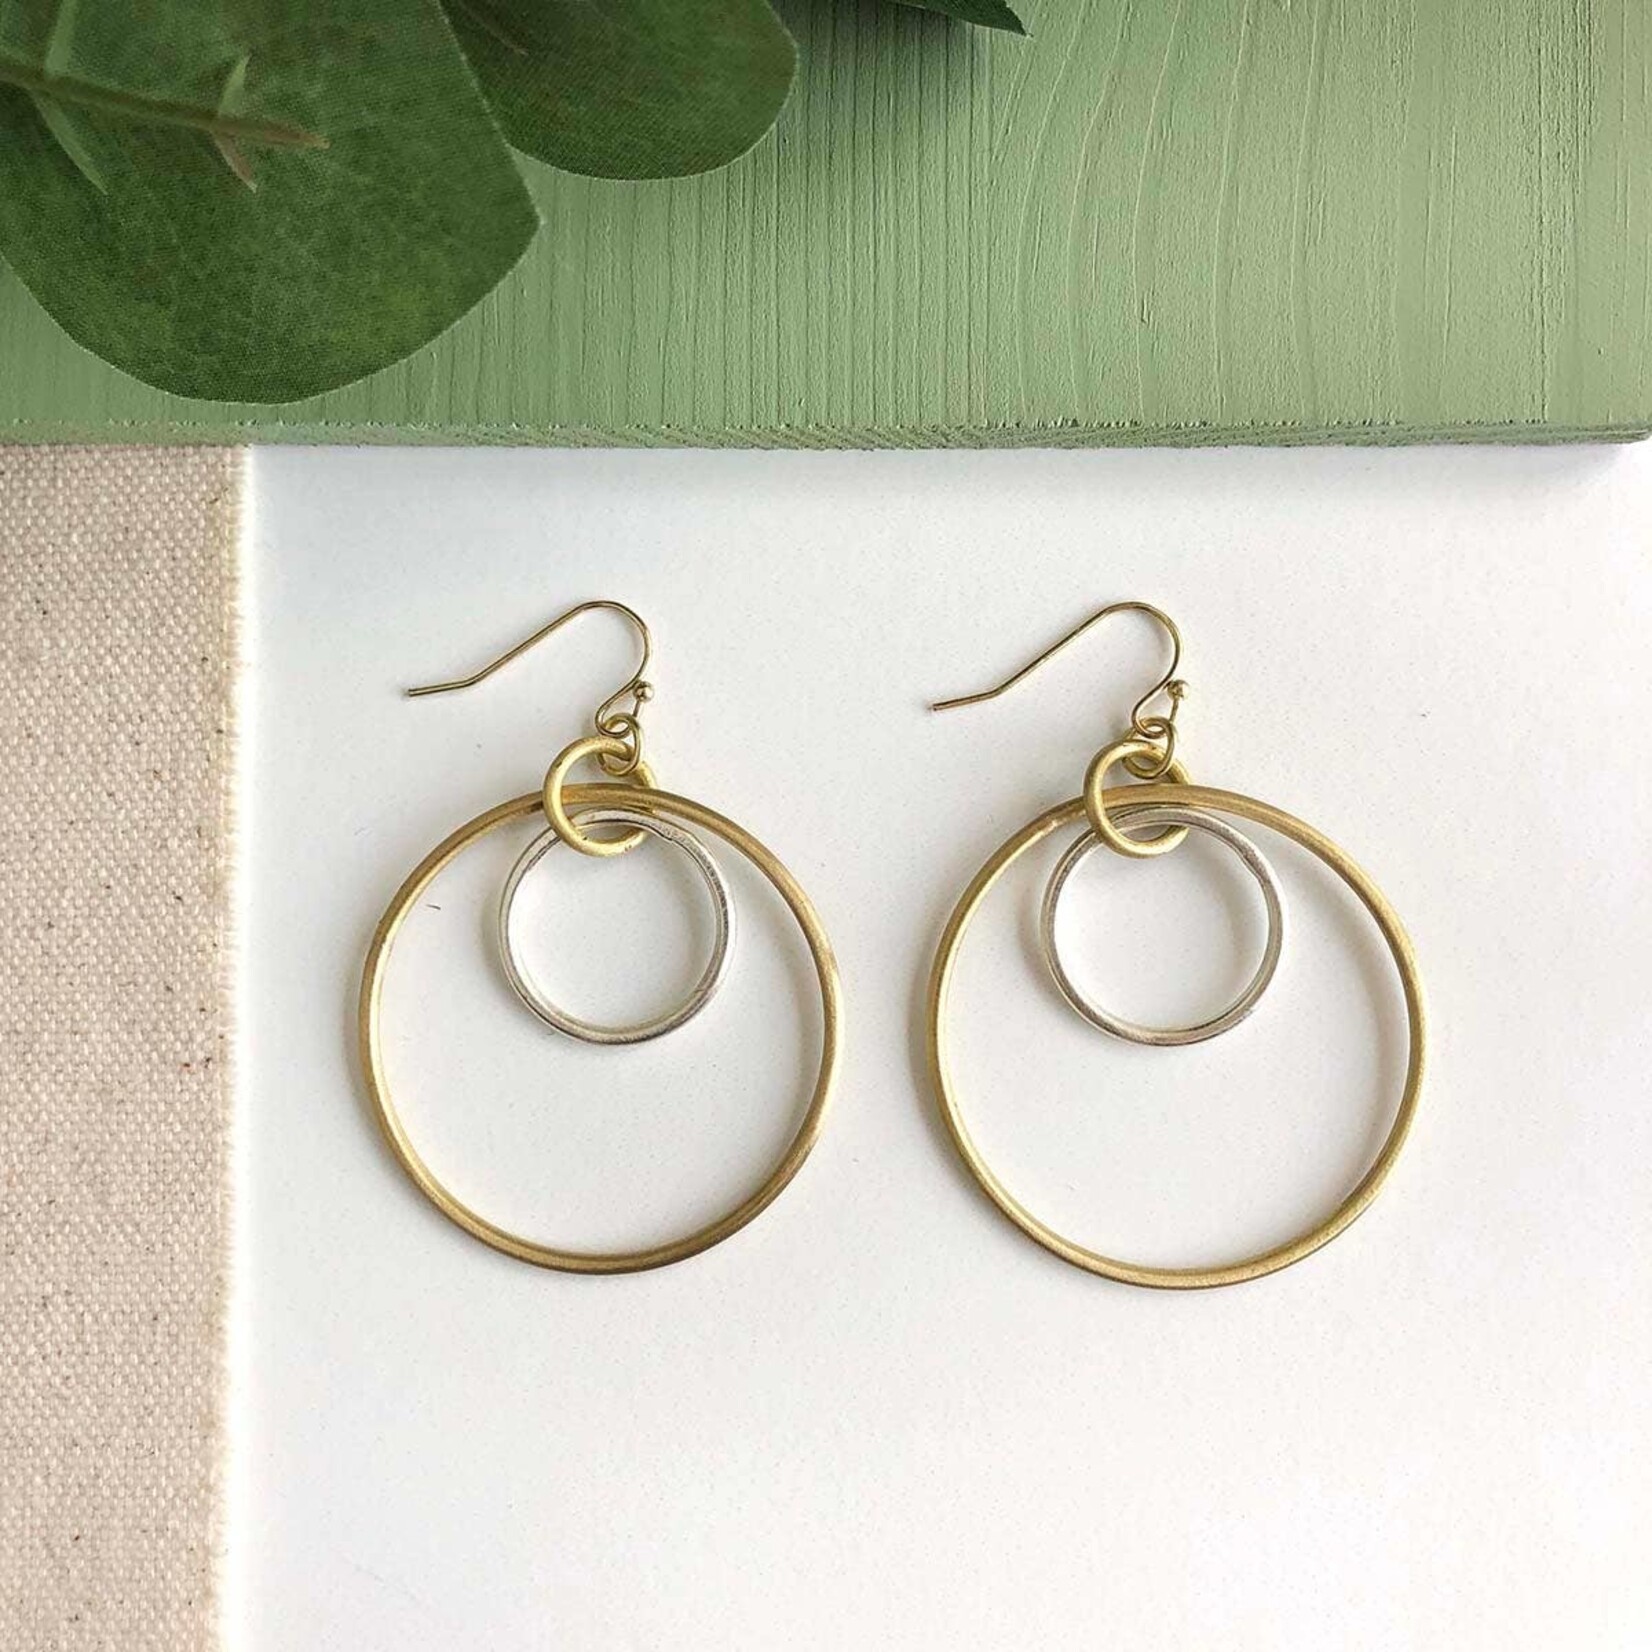 World Finds World Finds Borealis Hoop Earrings